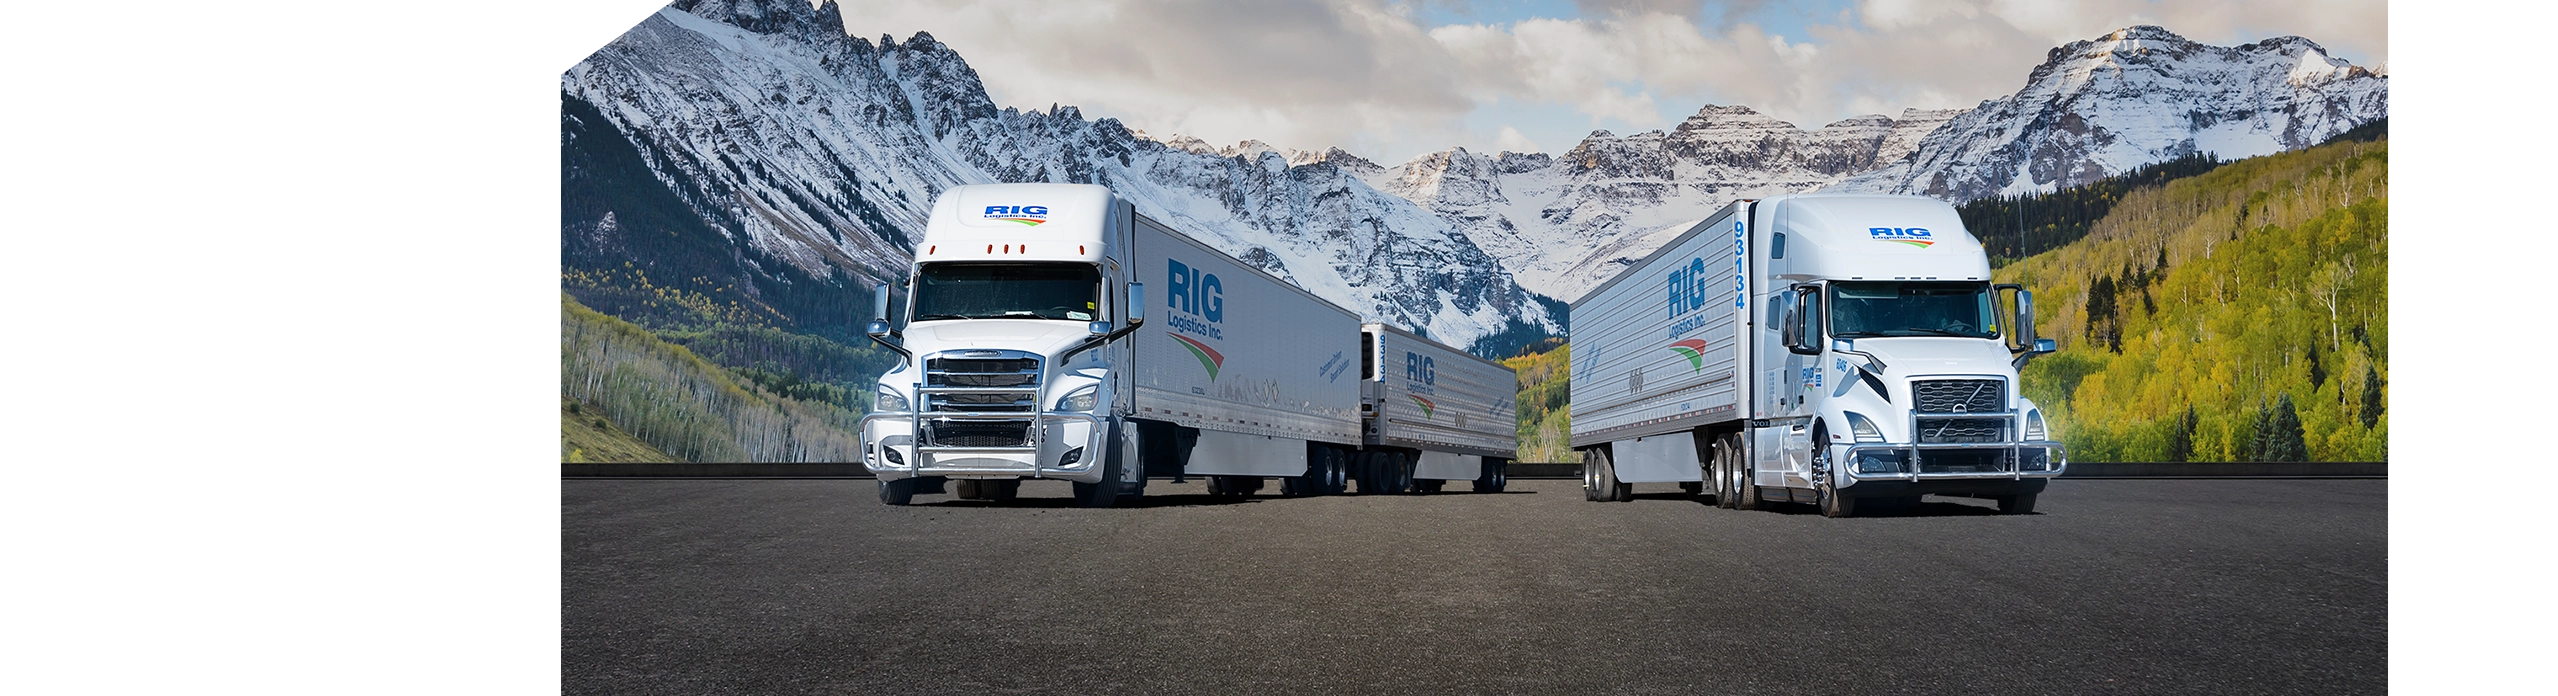 RIG Logistics long combination vehicle (LCV) and highway truck parked in front of Western Canadian mountains